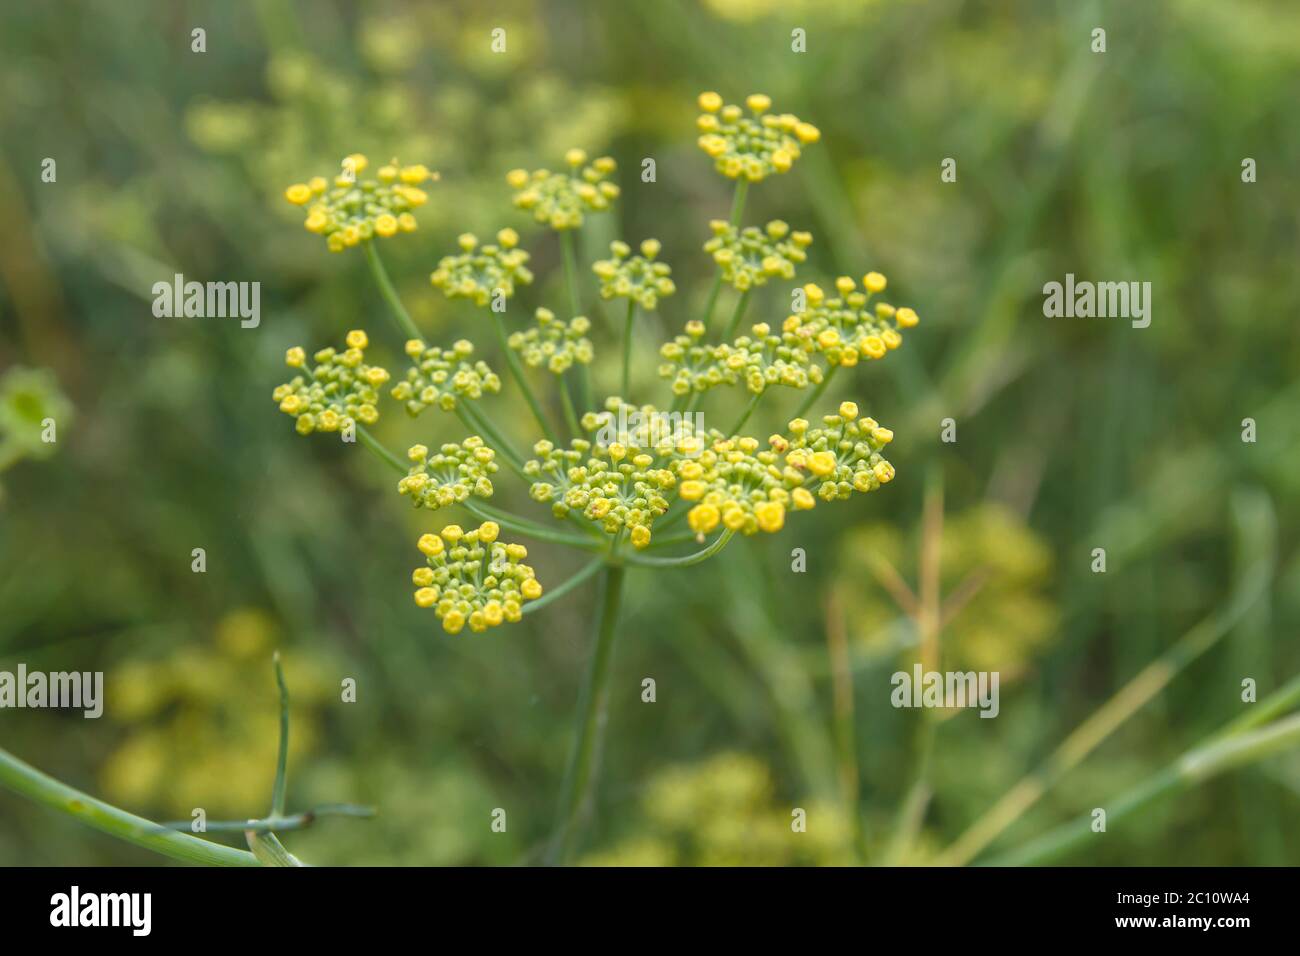 Anise plant yellow flowers blooming Stock Photo